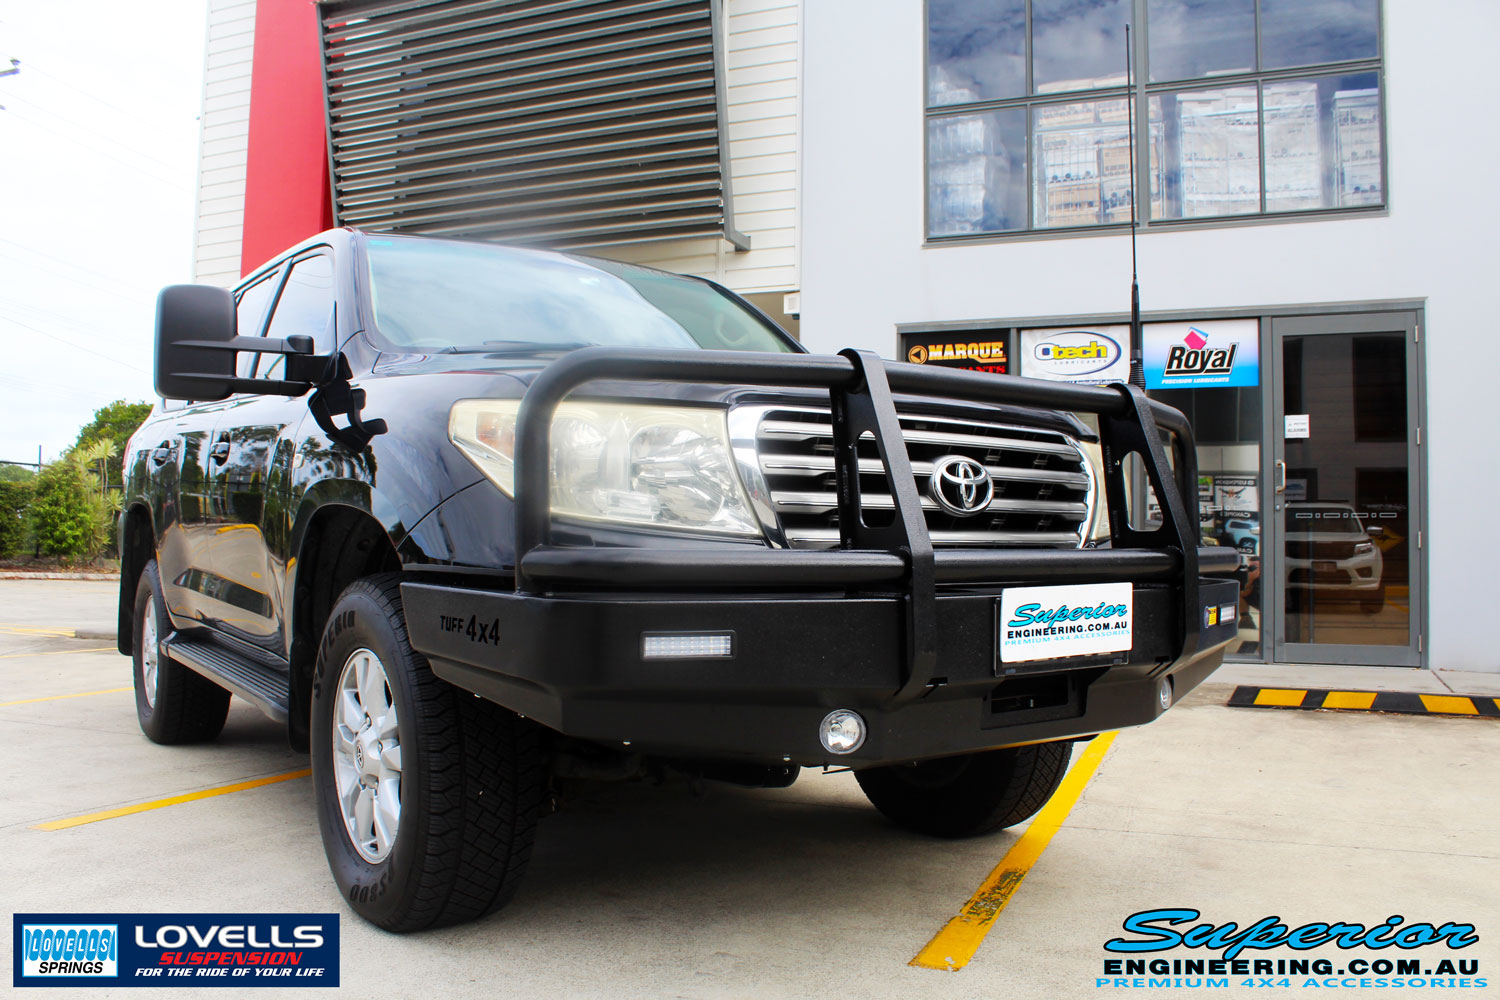 Right front side view of a Toyota 200 Series Landcruiser after fitment of a Lovells GVM Upgrade Suitable For Toyota Landcruiser 200 Diesel 11/07 on 3800kg (OE 3300kg) Post Registration